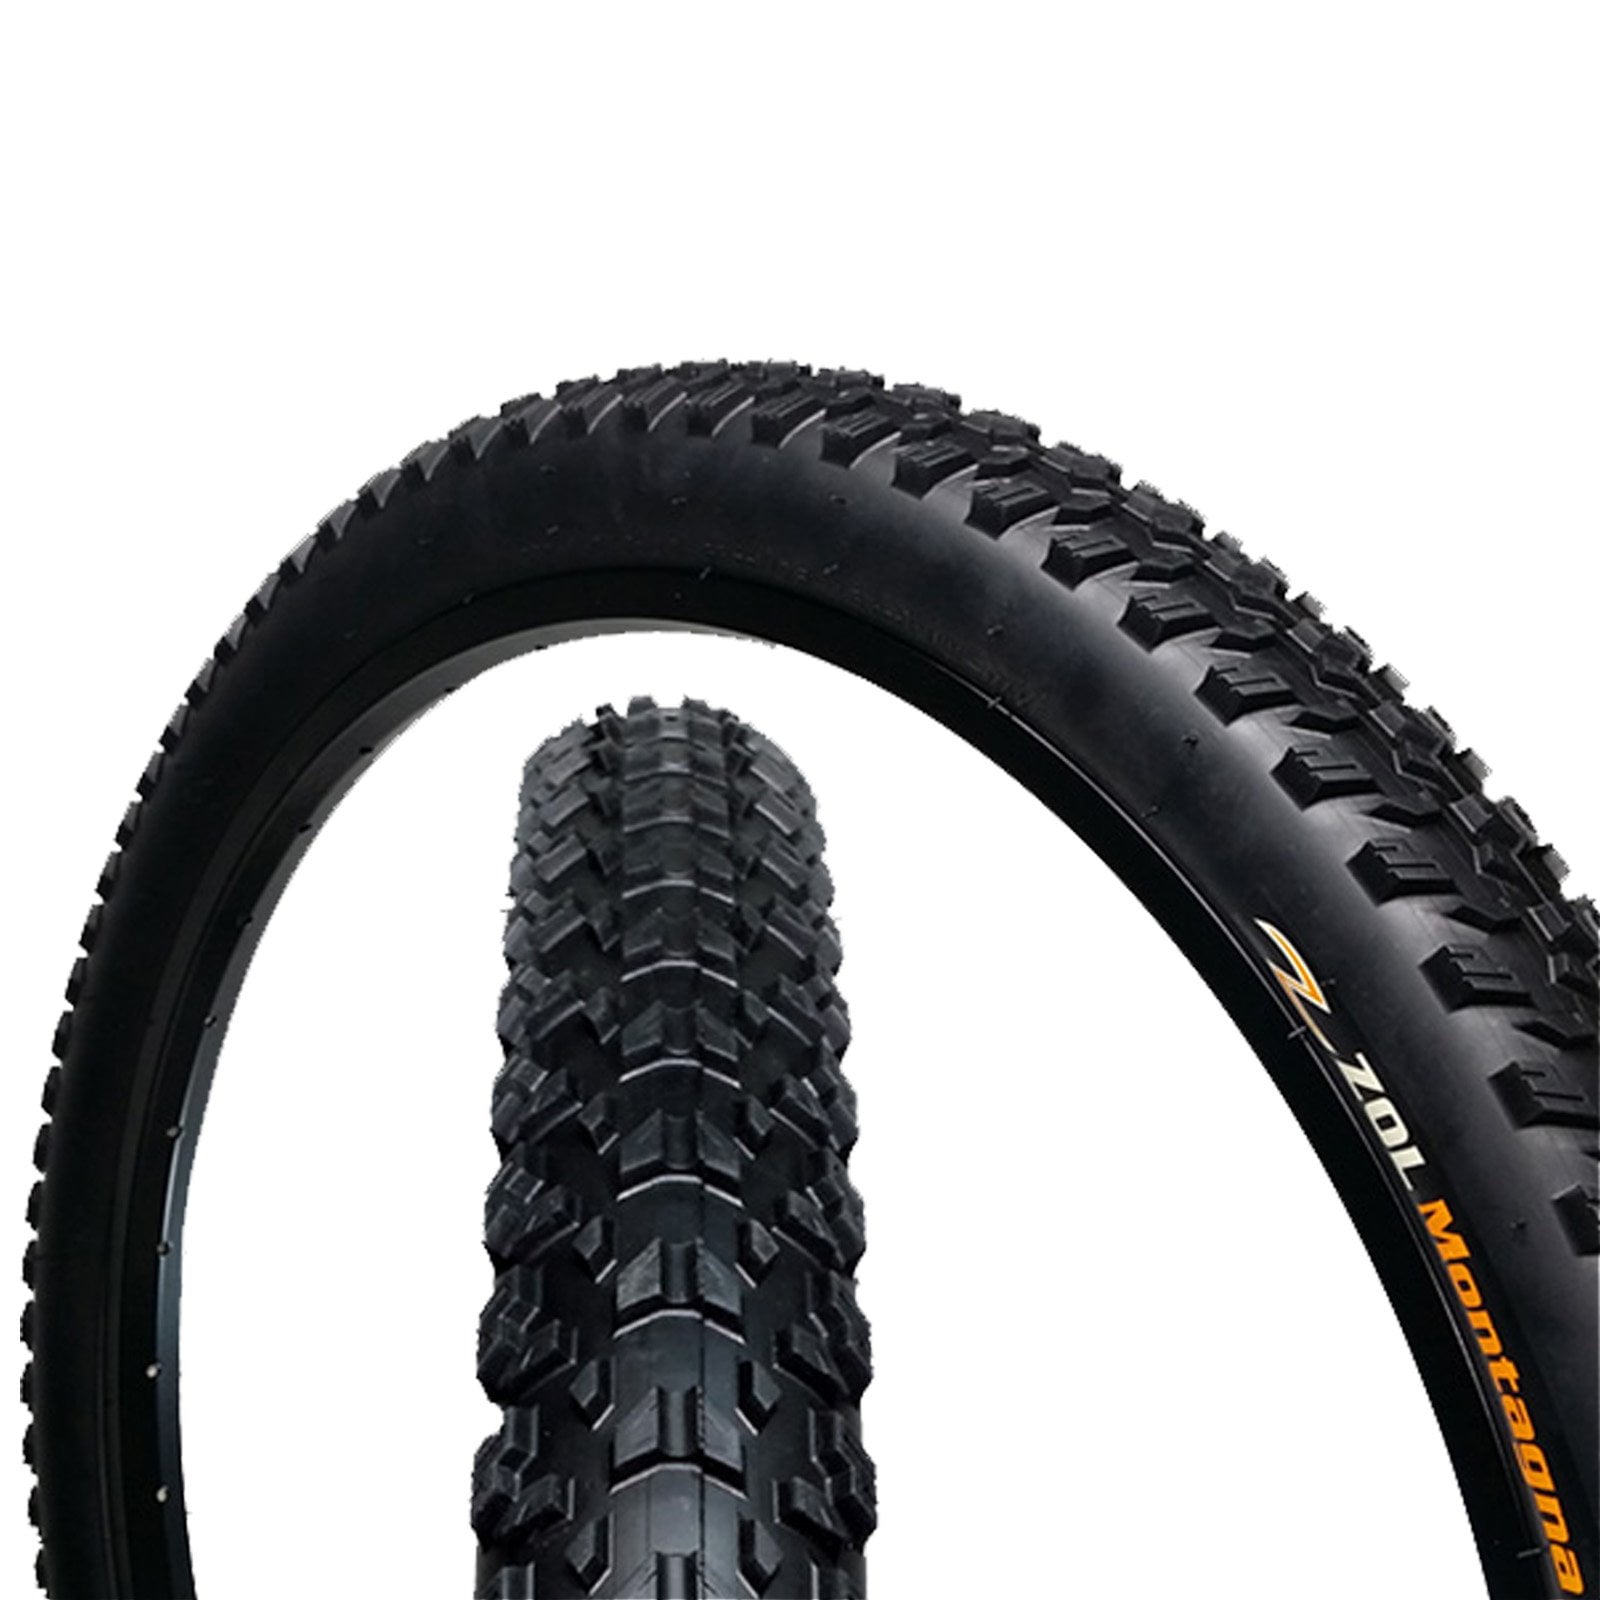 KENDA Mountain Bike Tires 26*2.125 inch Durable Clincher 40 PSI Bicycle Tyre 1PC